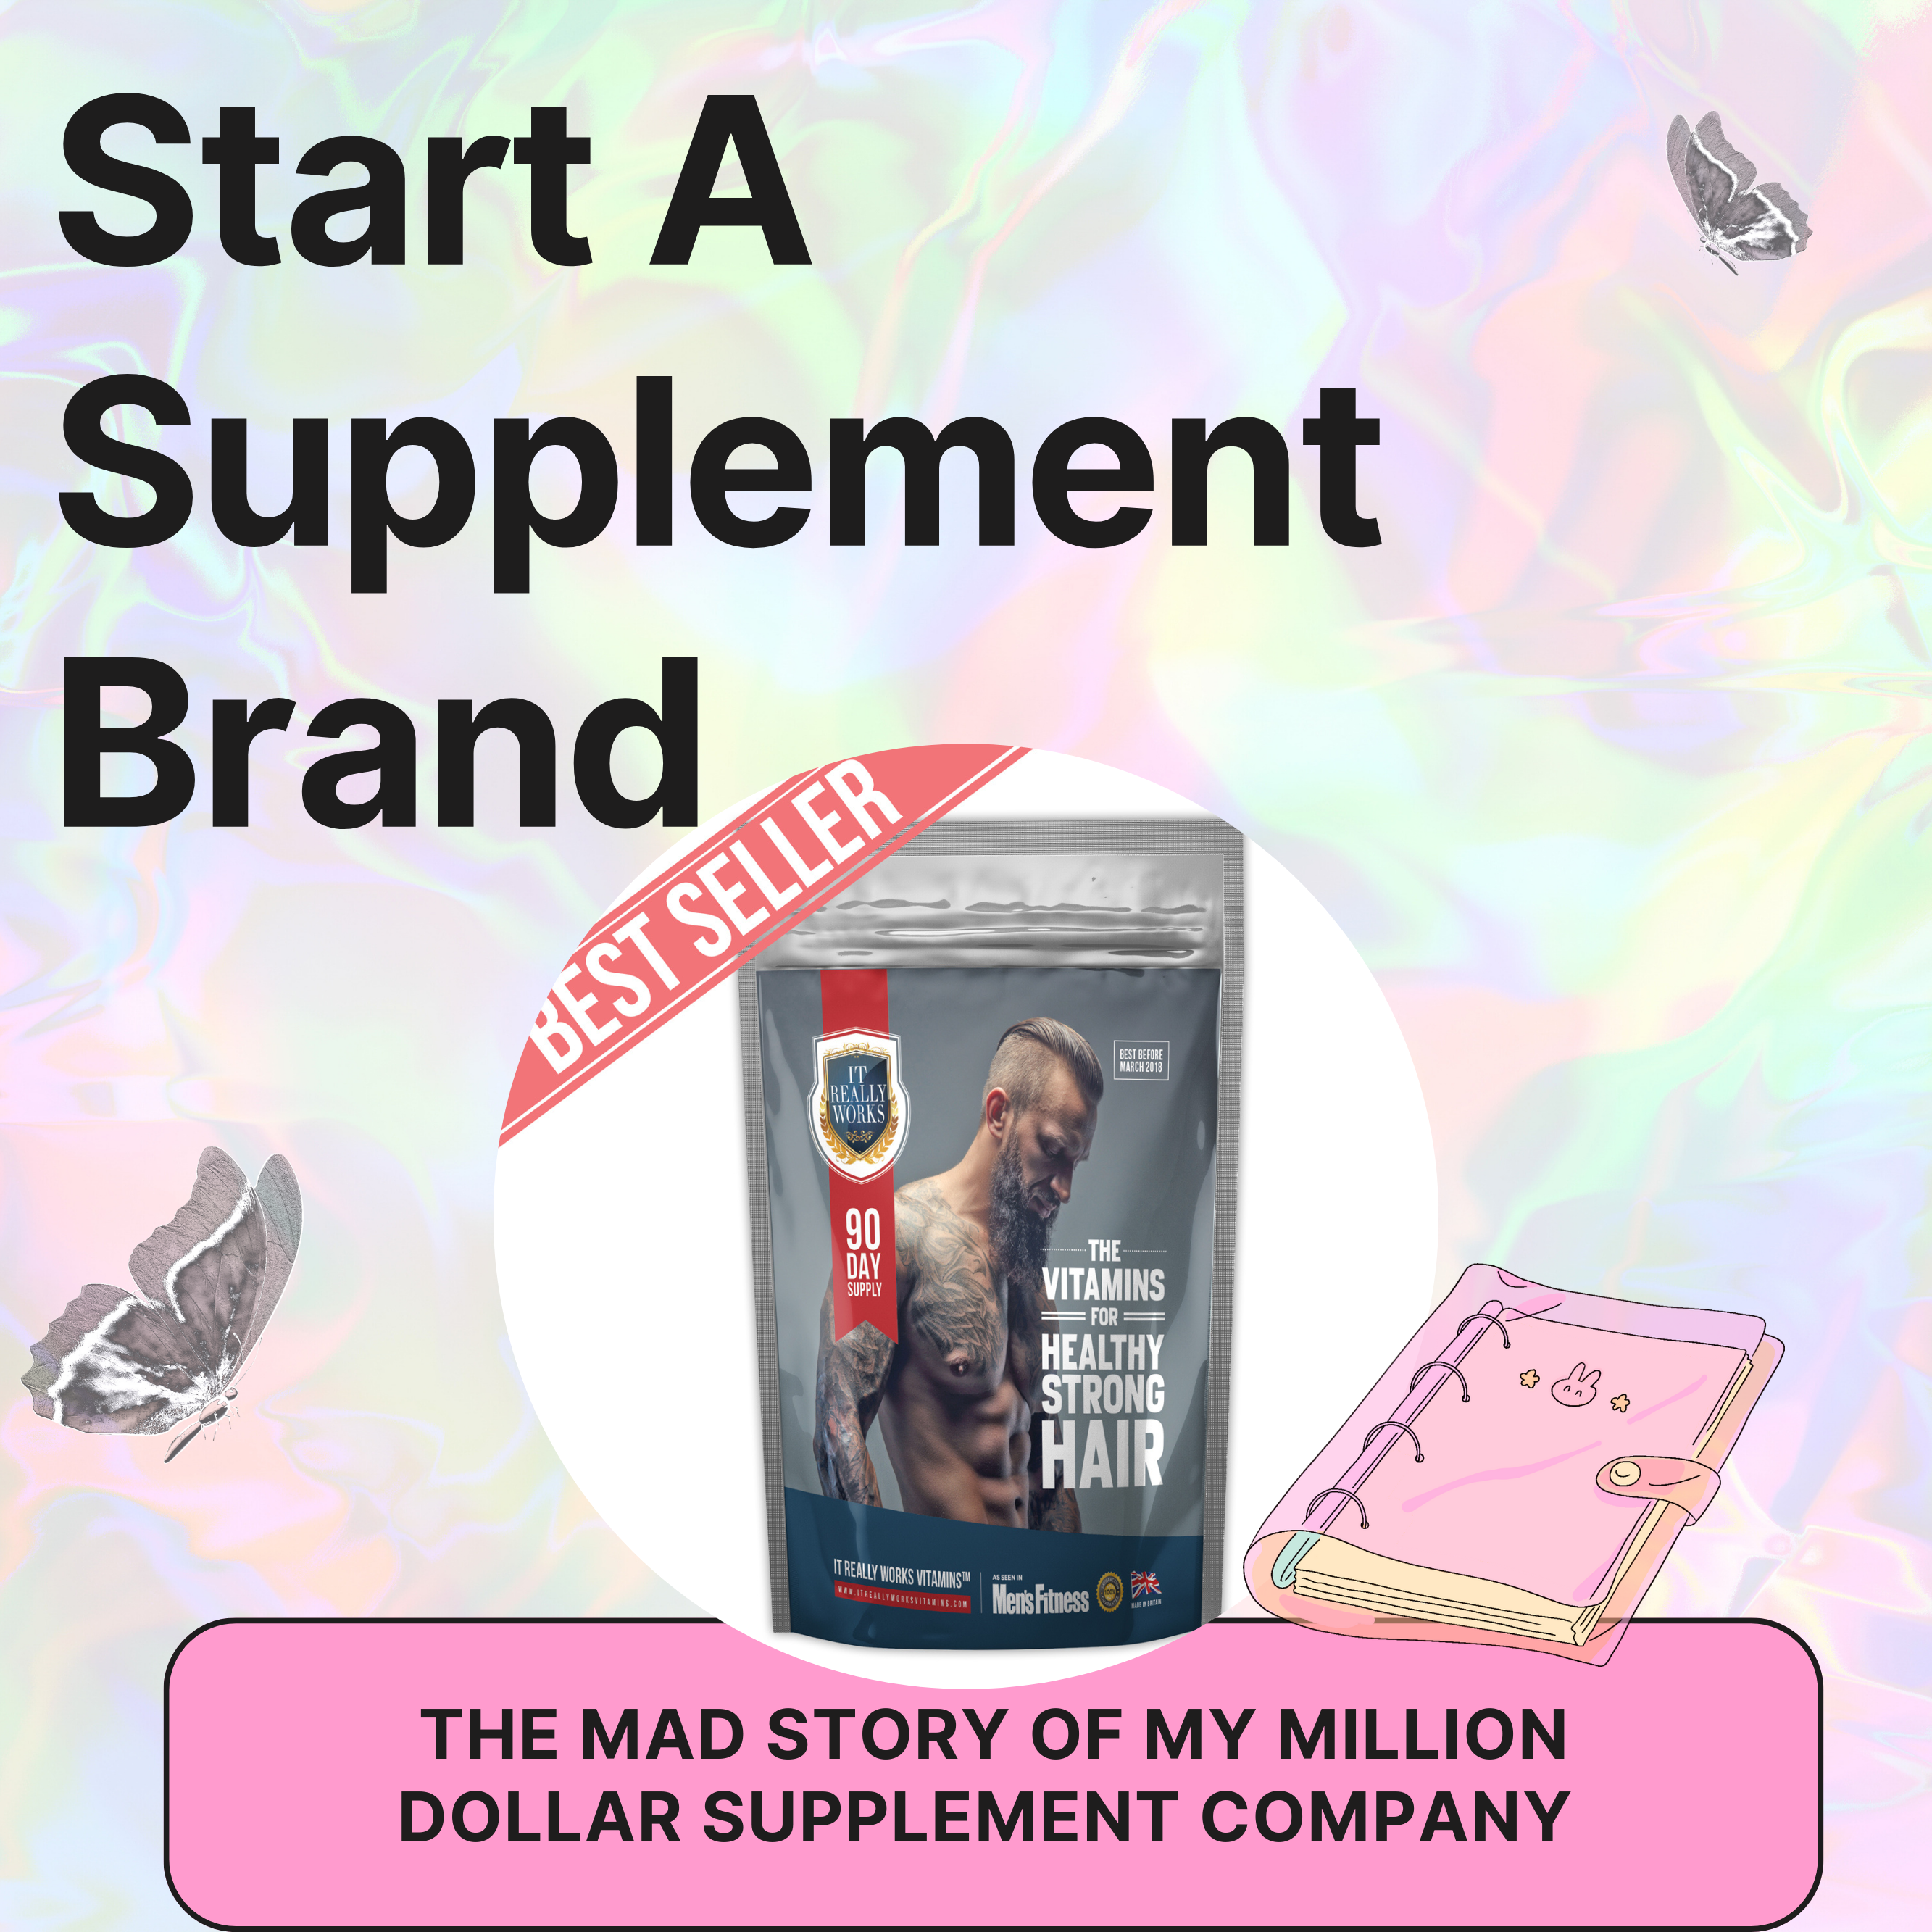 The ultimate supplement business launch